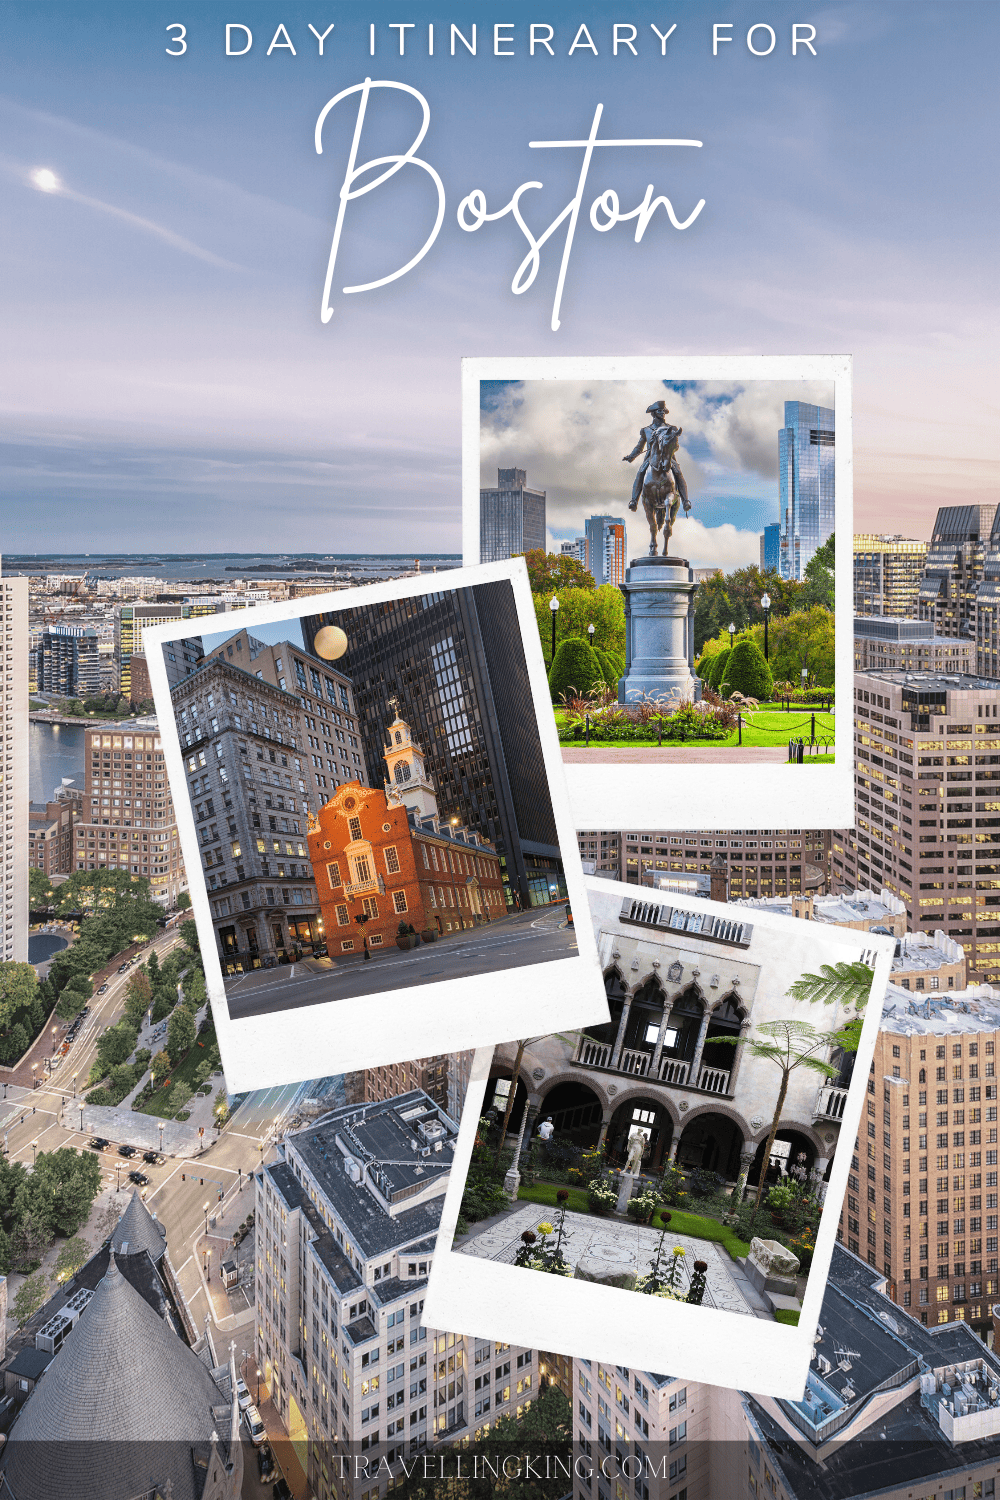 3 Day Itinerary for Boston